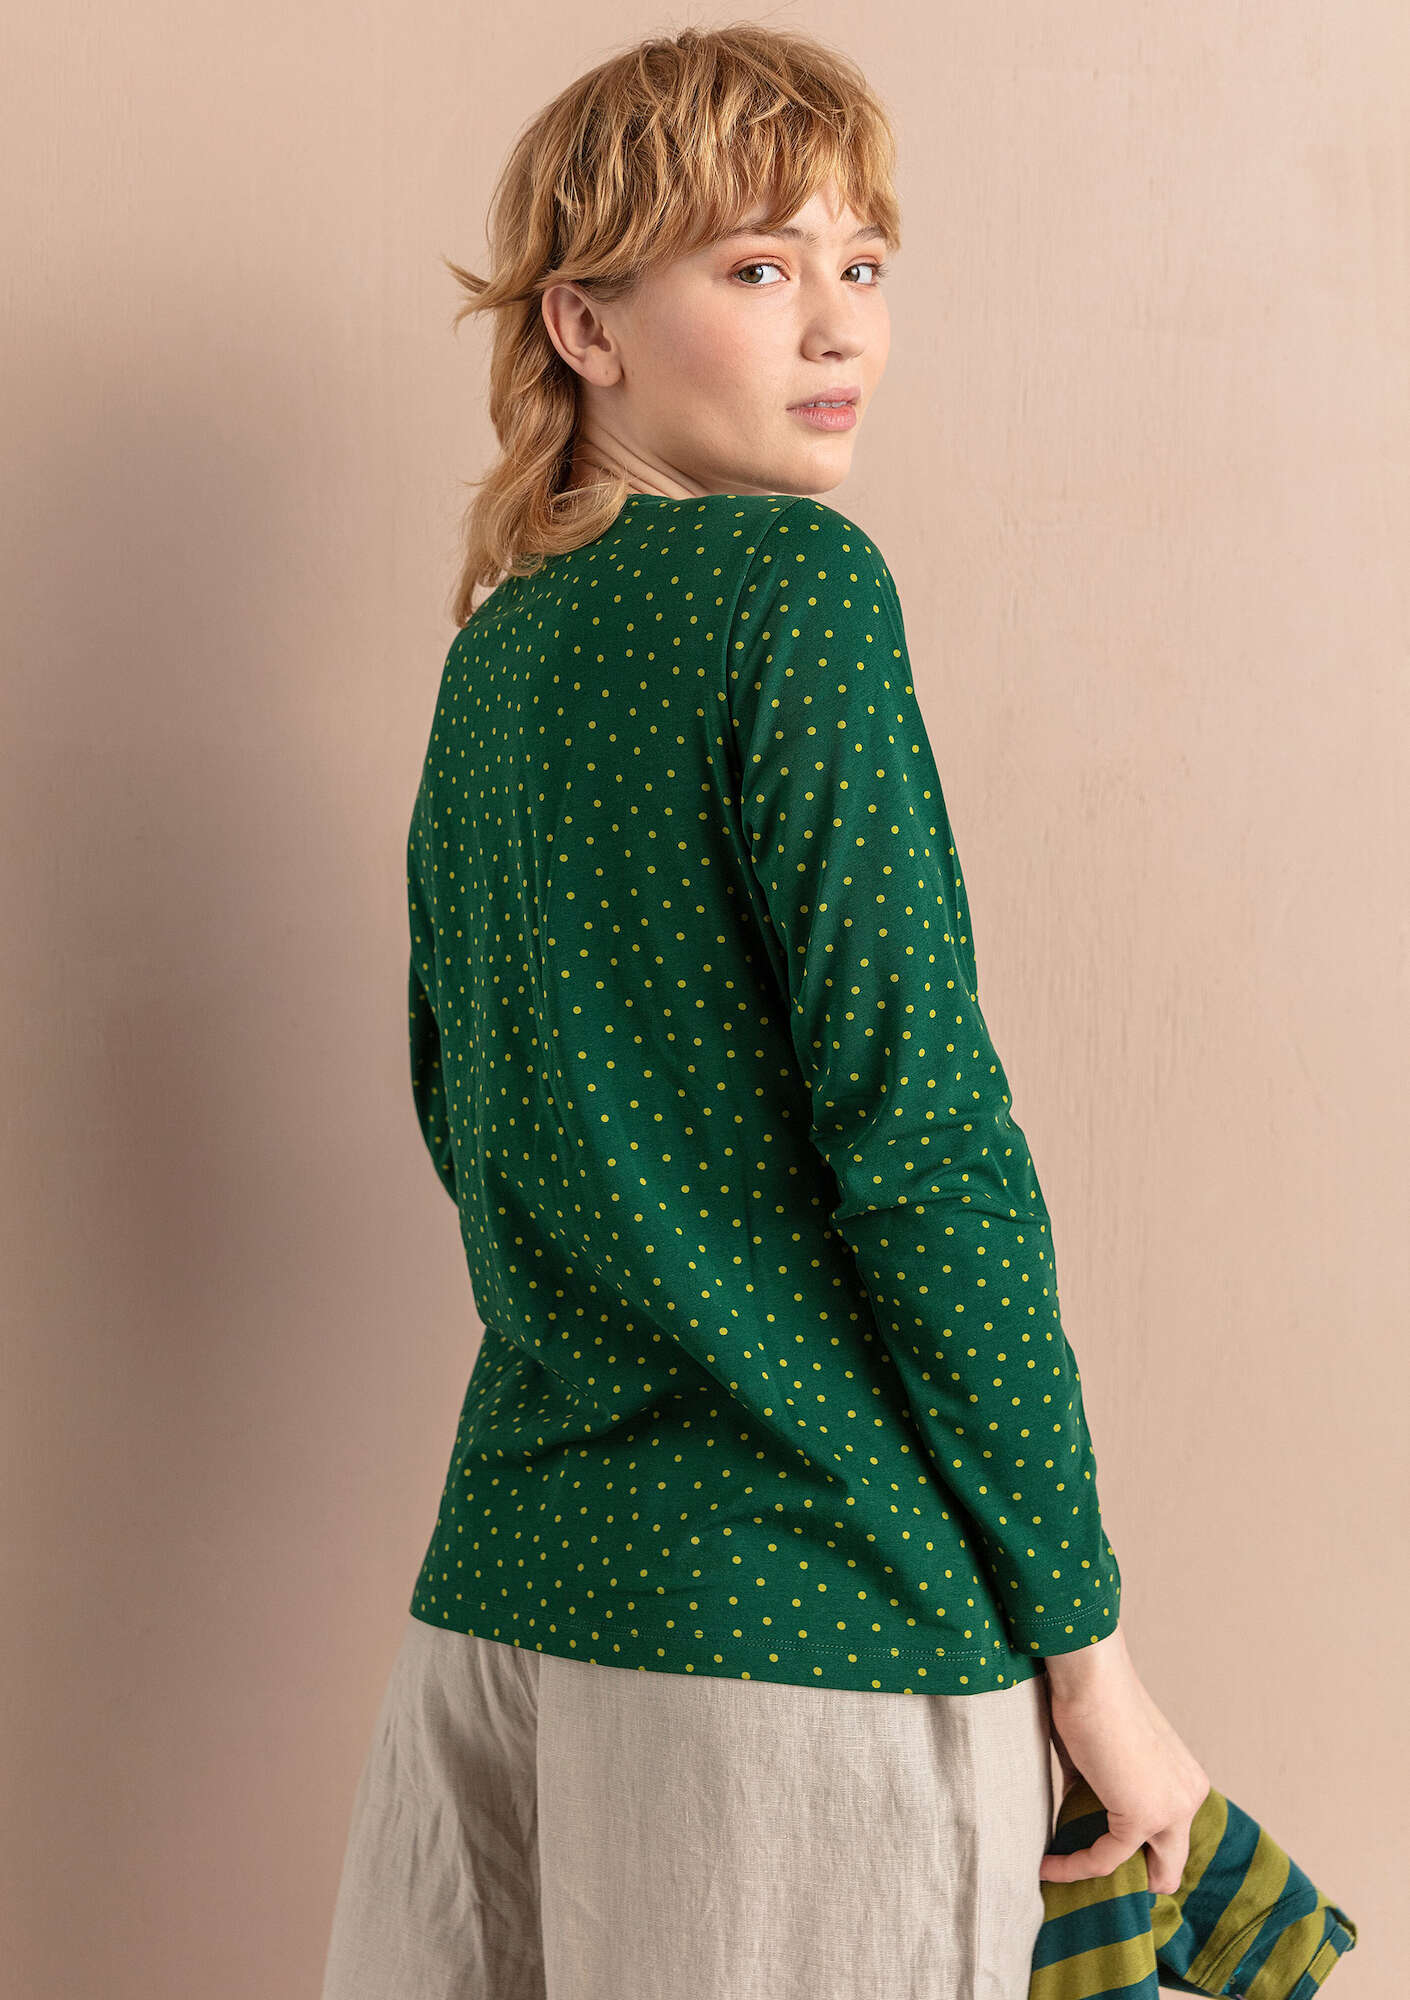 “Pytte” jersey top in organic cotton/spandex bottle green/patterned